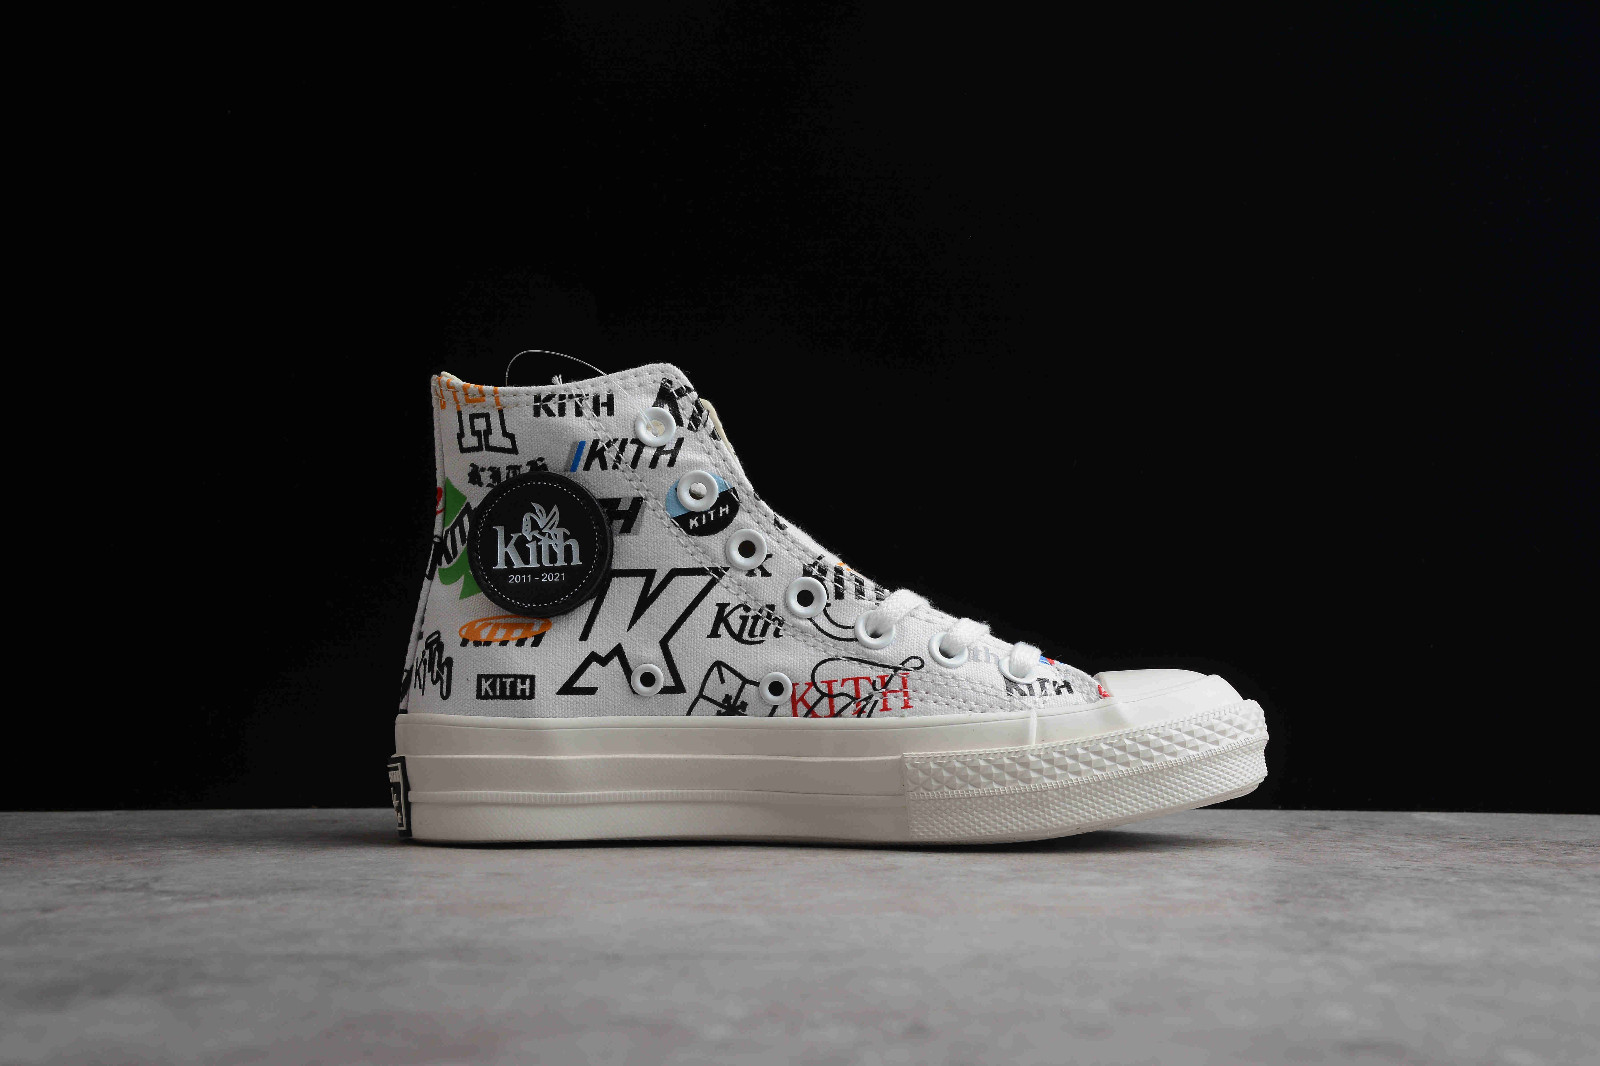 konstant Manifold vært MultiscaleconsultingShops - Kith X Converse Chuck Taylor All Star 70 High  10th Anniversary White Multi - Converse Chuck Taylor All Star Lift Sneakers  basse bianco sporco con linguetta a contrasto - Color 172466C